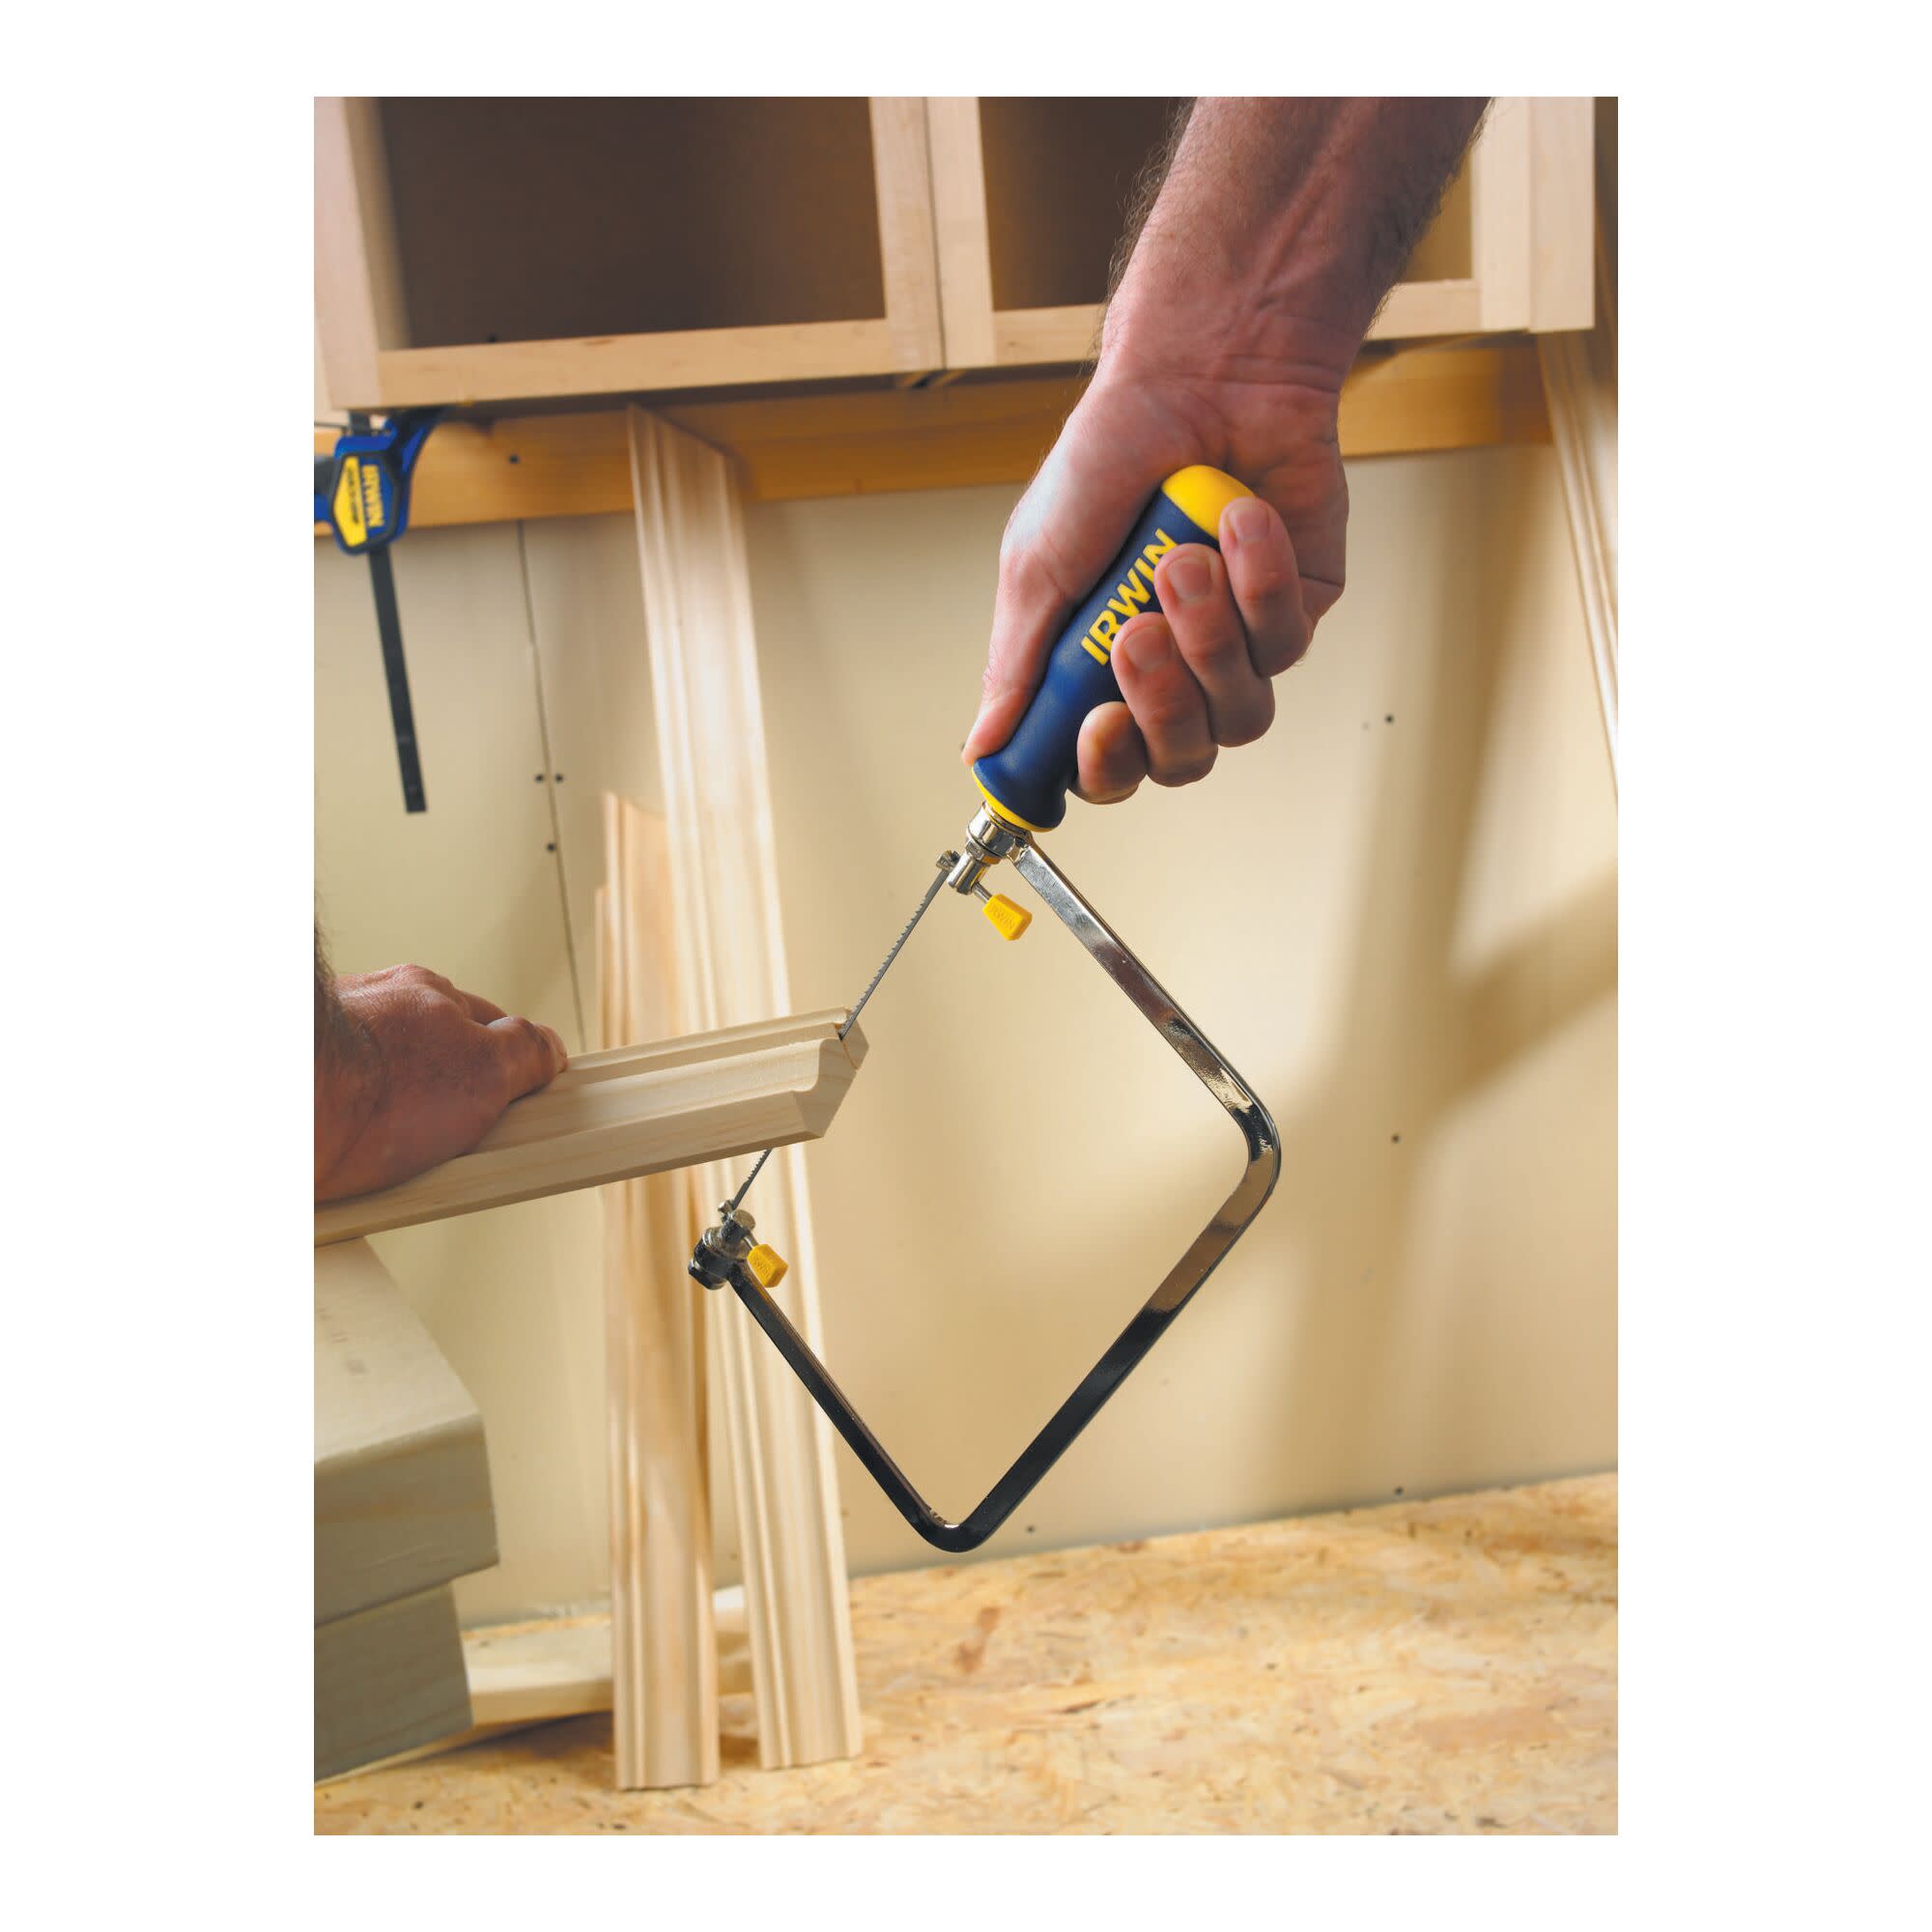 IRWIN Coping Saw: 6 1/2 in Blade Lg, Steel, 13 1/4 in Overall Lg, 10, Rubber